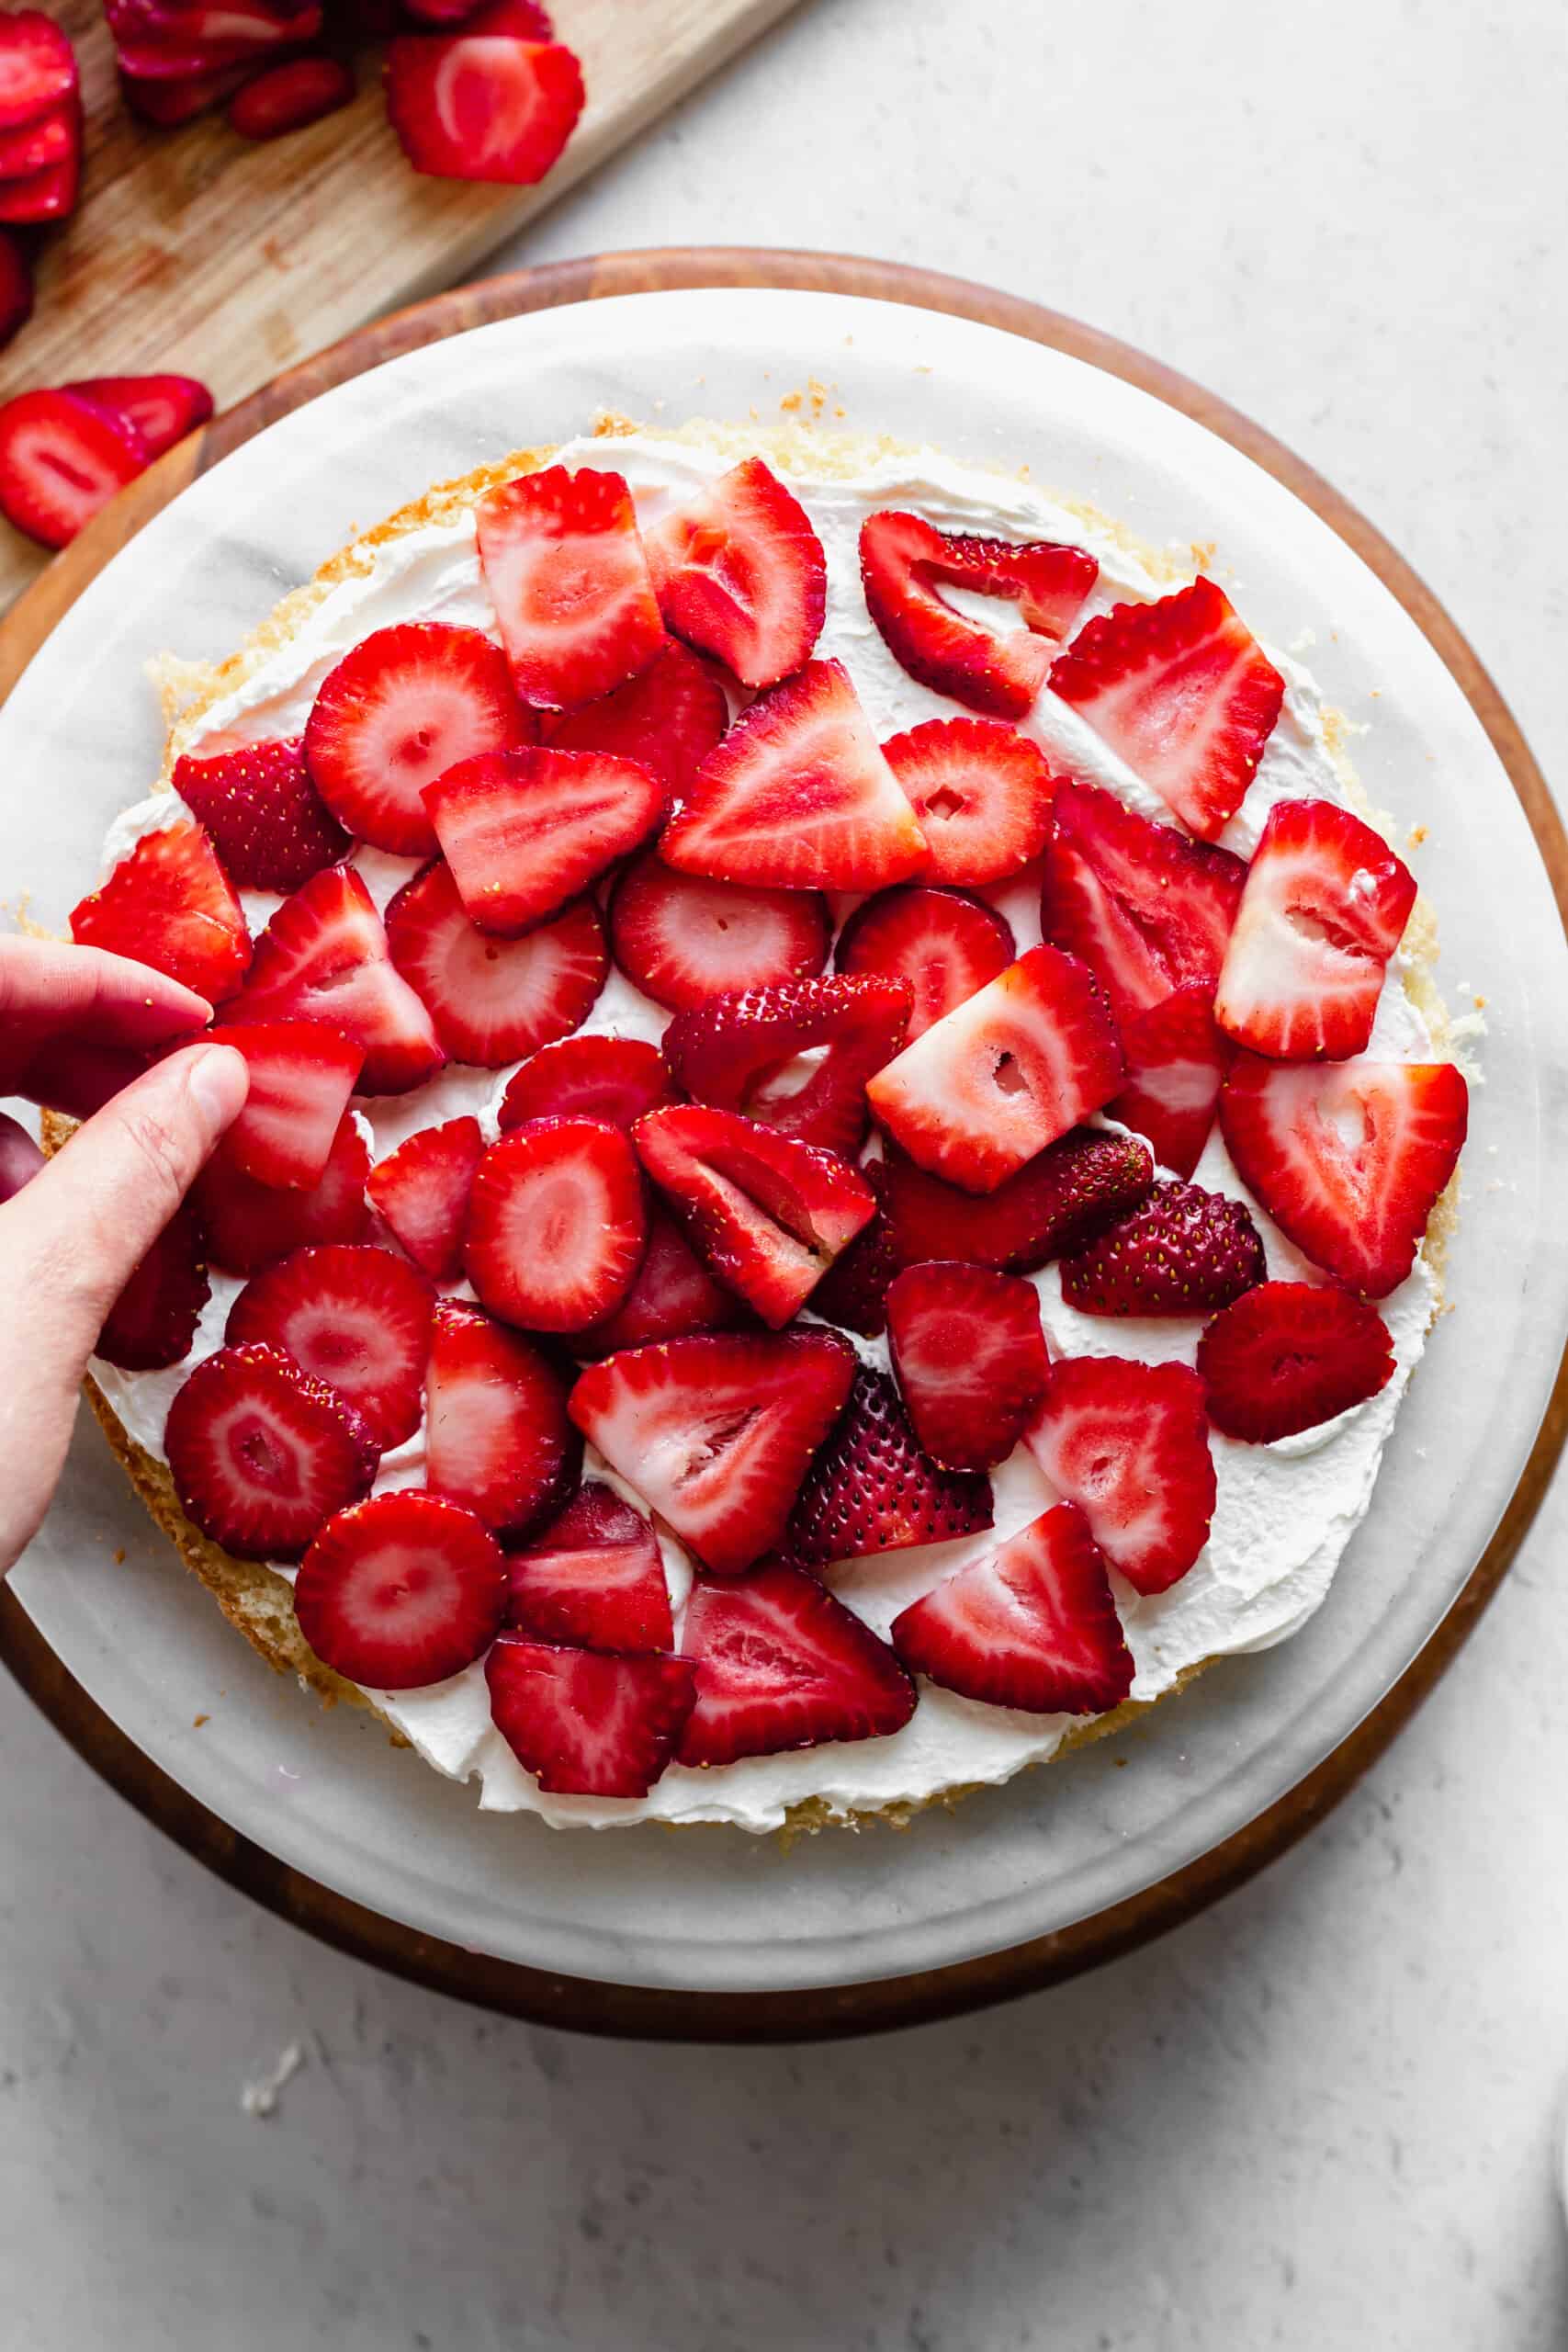 Freshly sliced strawberries are added to the layer of whipped cream.